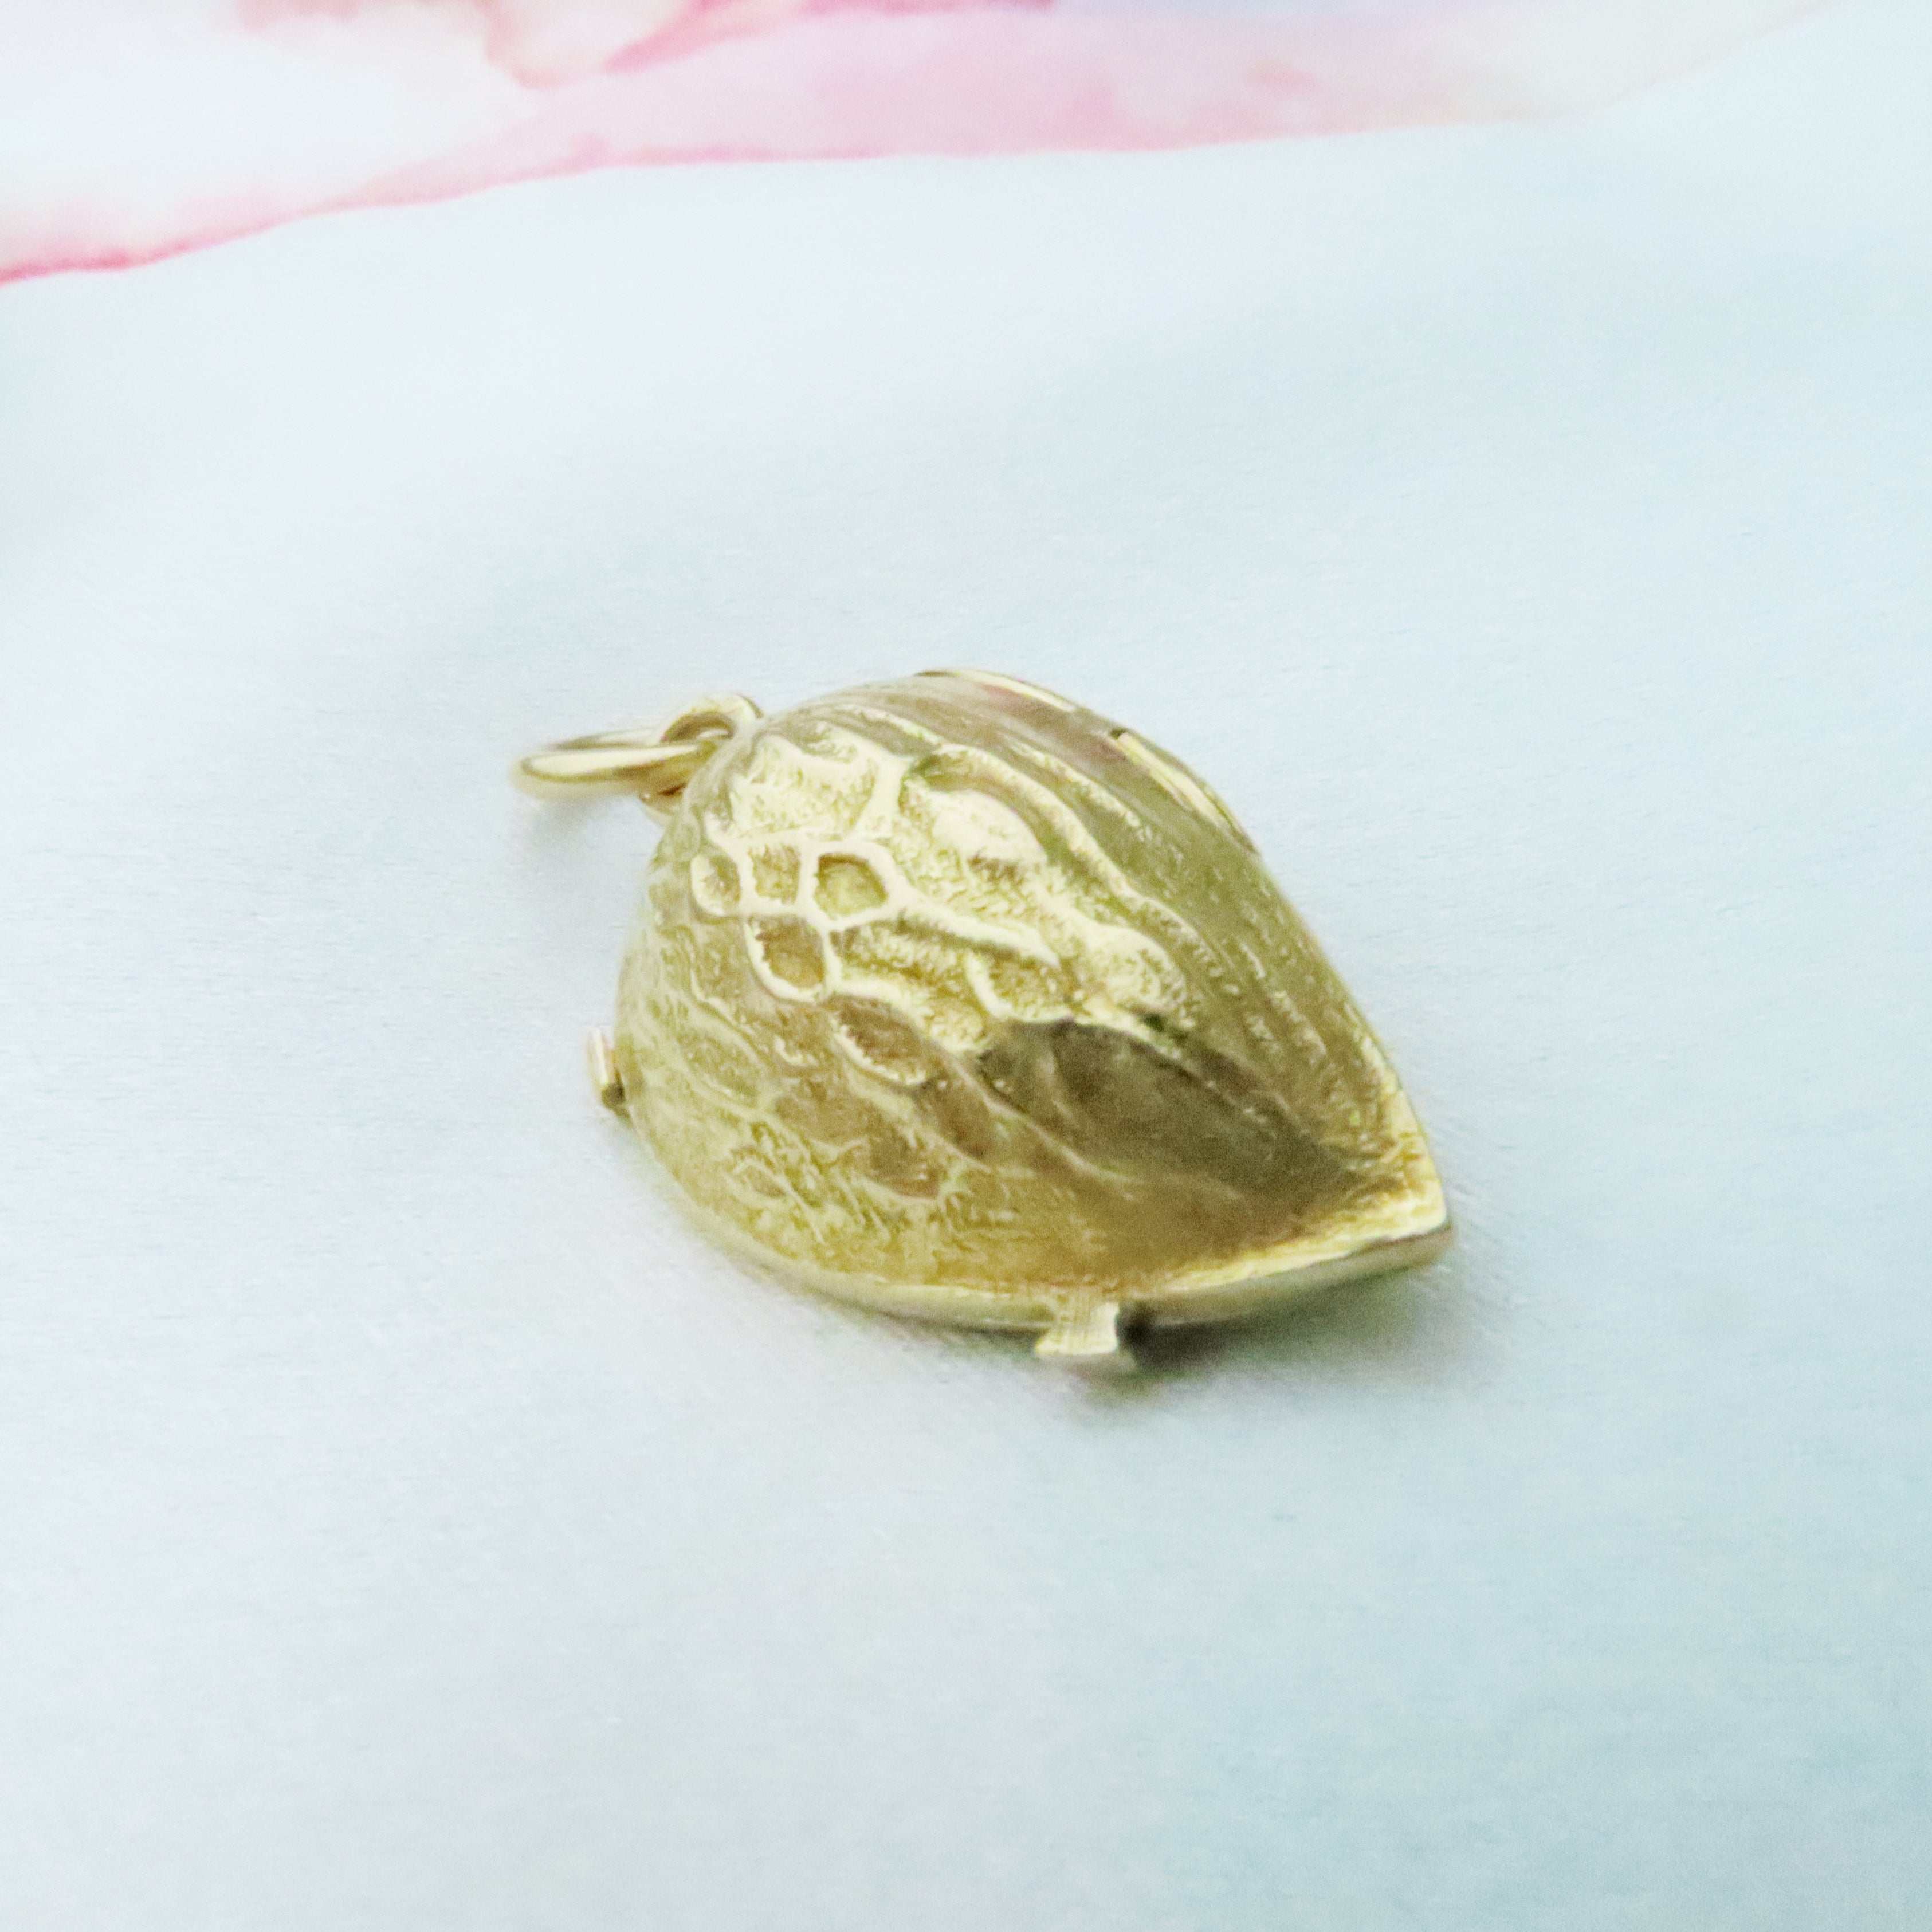 18ct almond pendant / charm with nuts inside